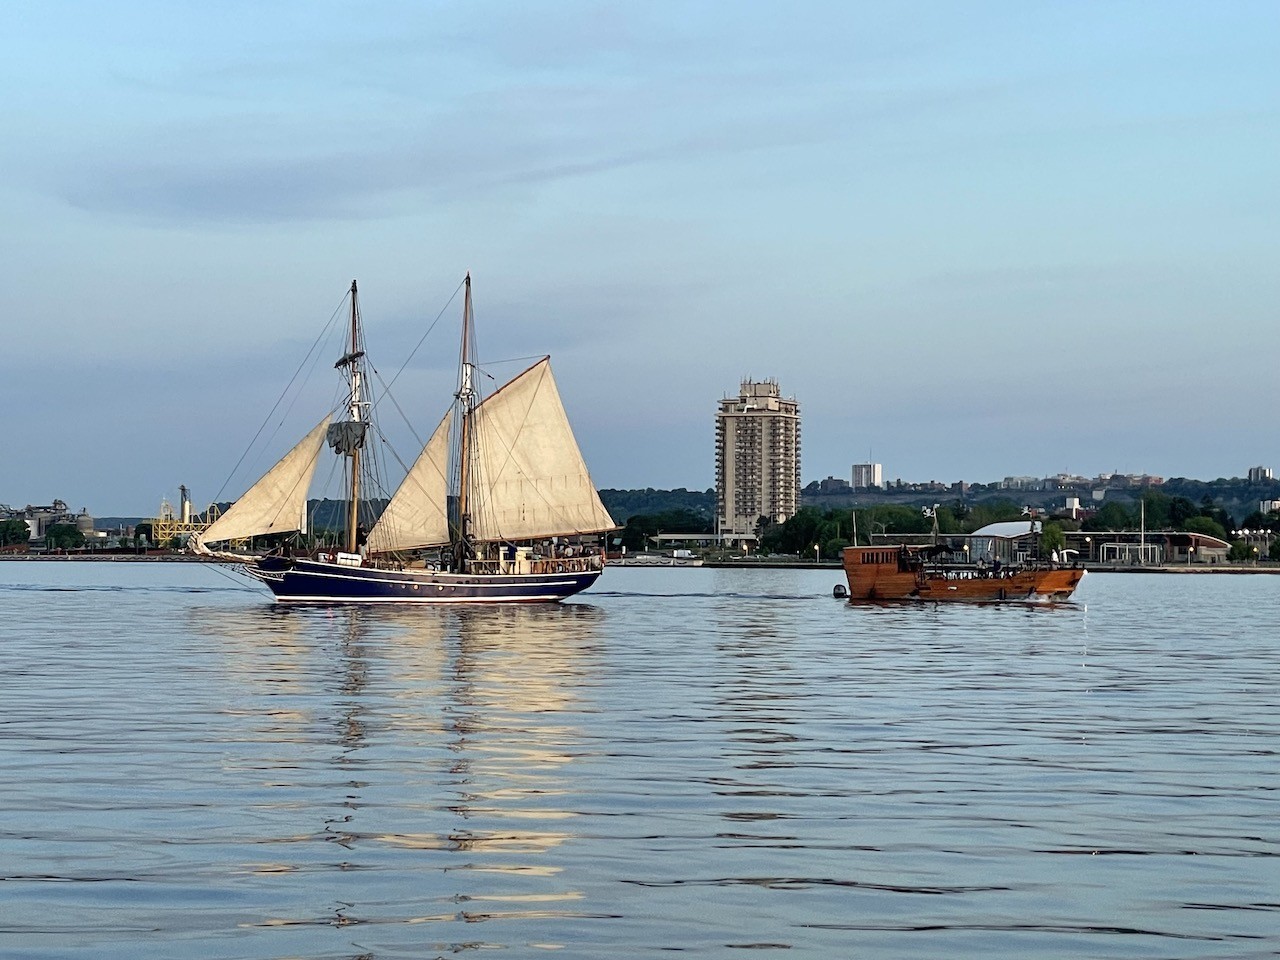 Boats in Hamilton Harbour Ontario Canada - A variety of different boats can be found in Hamilton Harbour. This particularly evening we came across one of the tall ships and a pirate ship used for entertainment in the Hamilton Harbour.